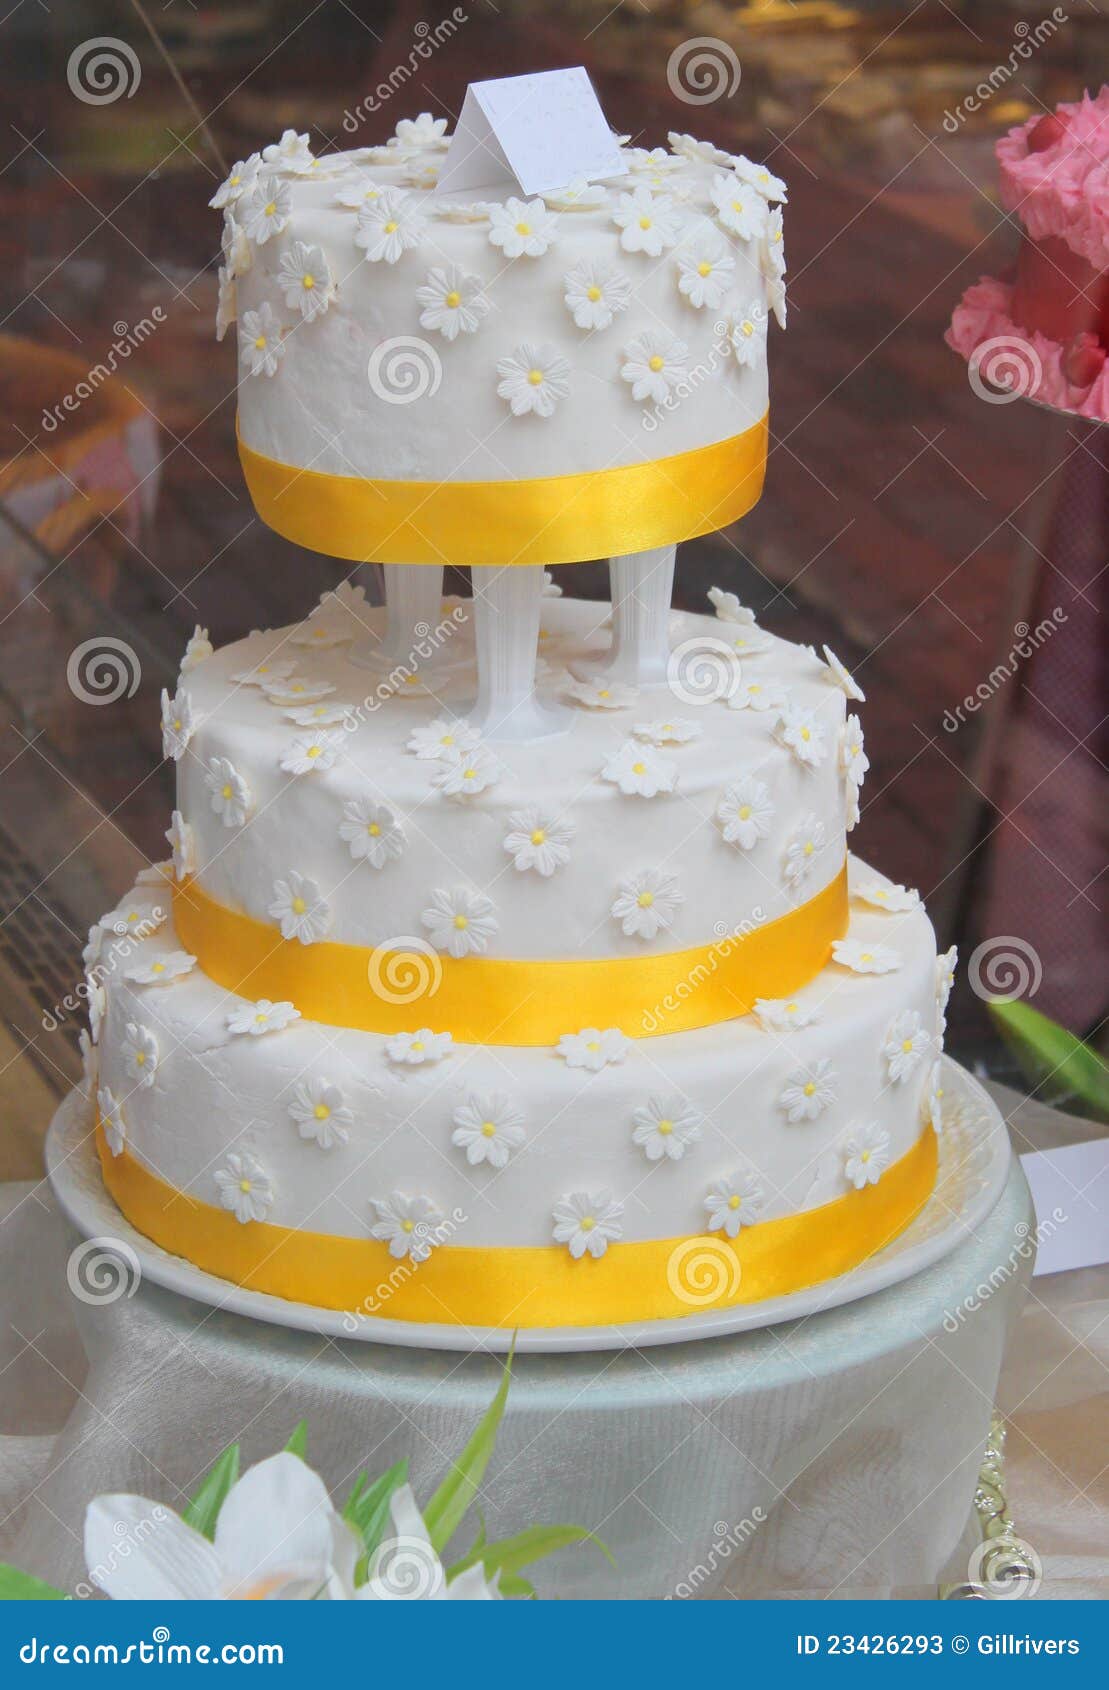 Three Tier Floral Wedding Cake Stock Image - Image of businesses ...